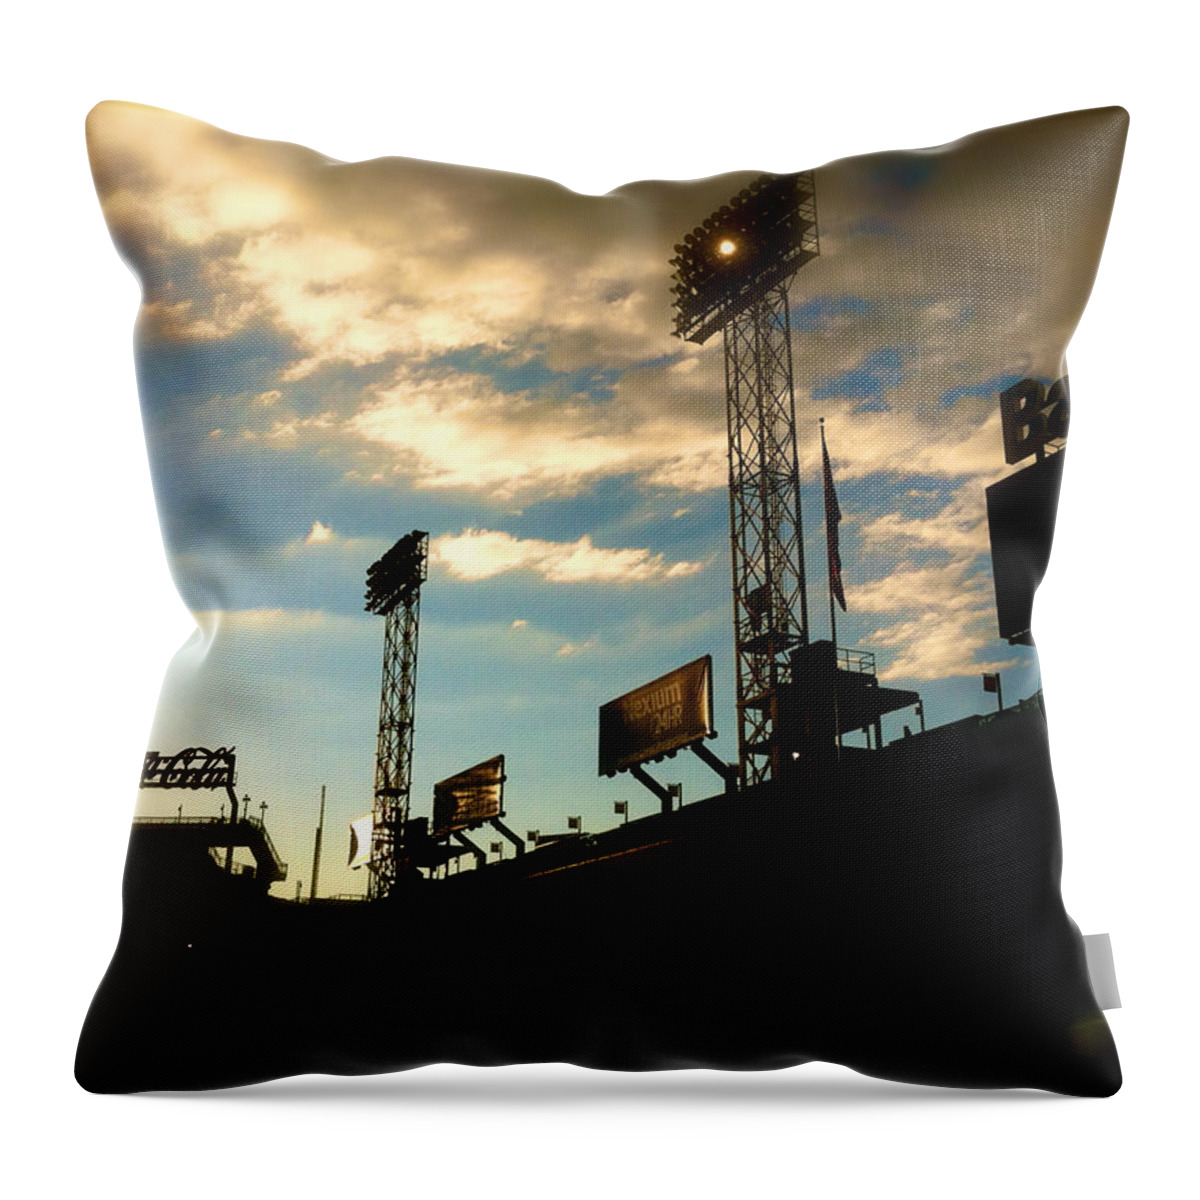 Fenway Park Collectibles Throw Pillow featuring the photograph Fenway Park Fenway Lights by Iconic Images Art Gallery David Pucciarelli